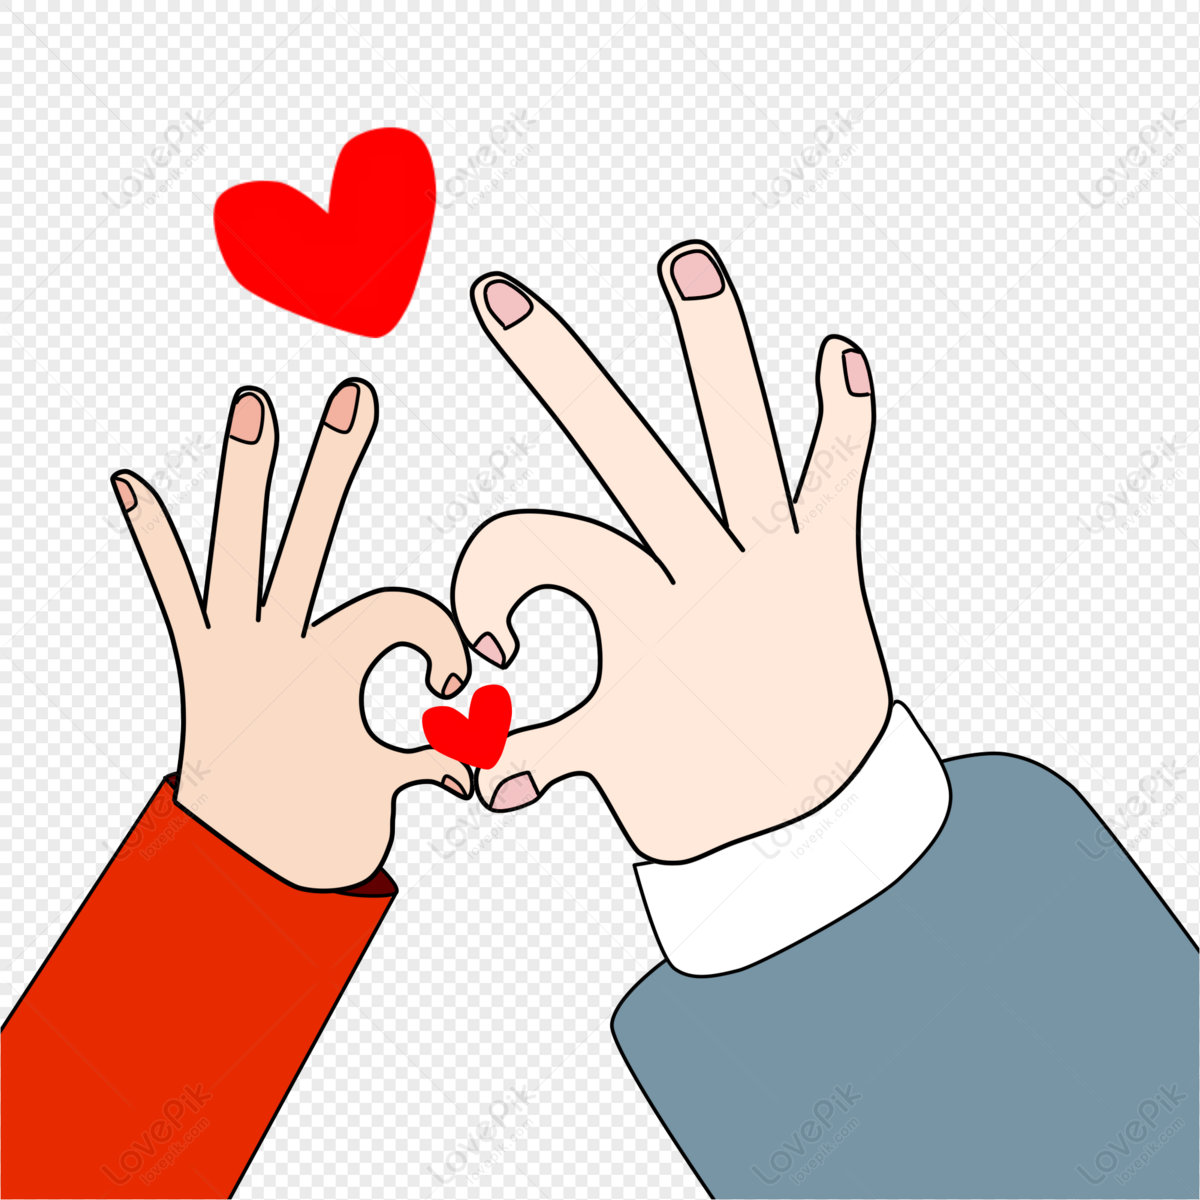 Fathers Day Love Heart Gesture PNG Transparent Background And Clipart Image  For Free Download - Lovepik | 401228730